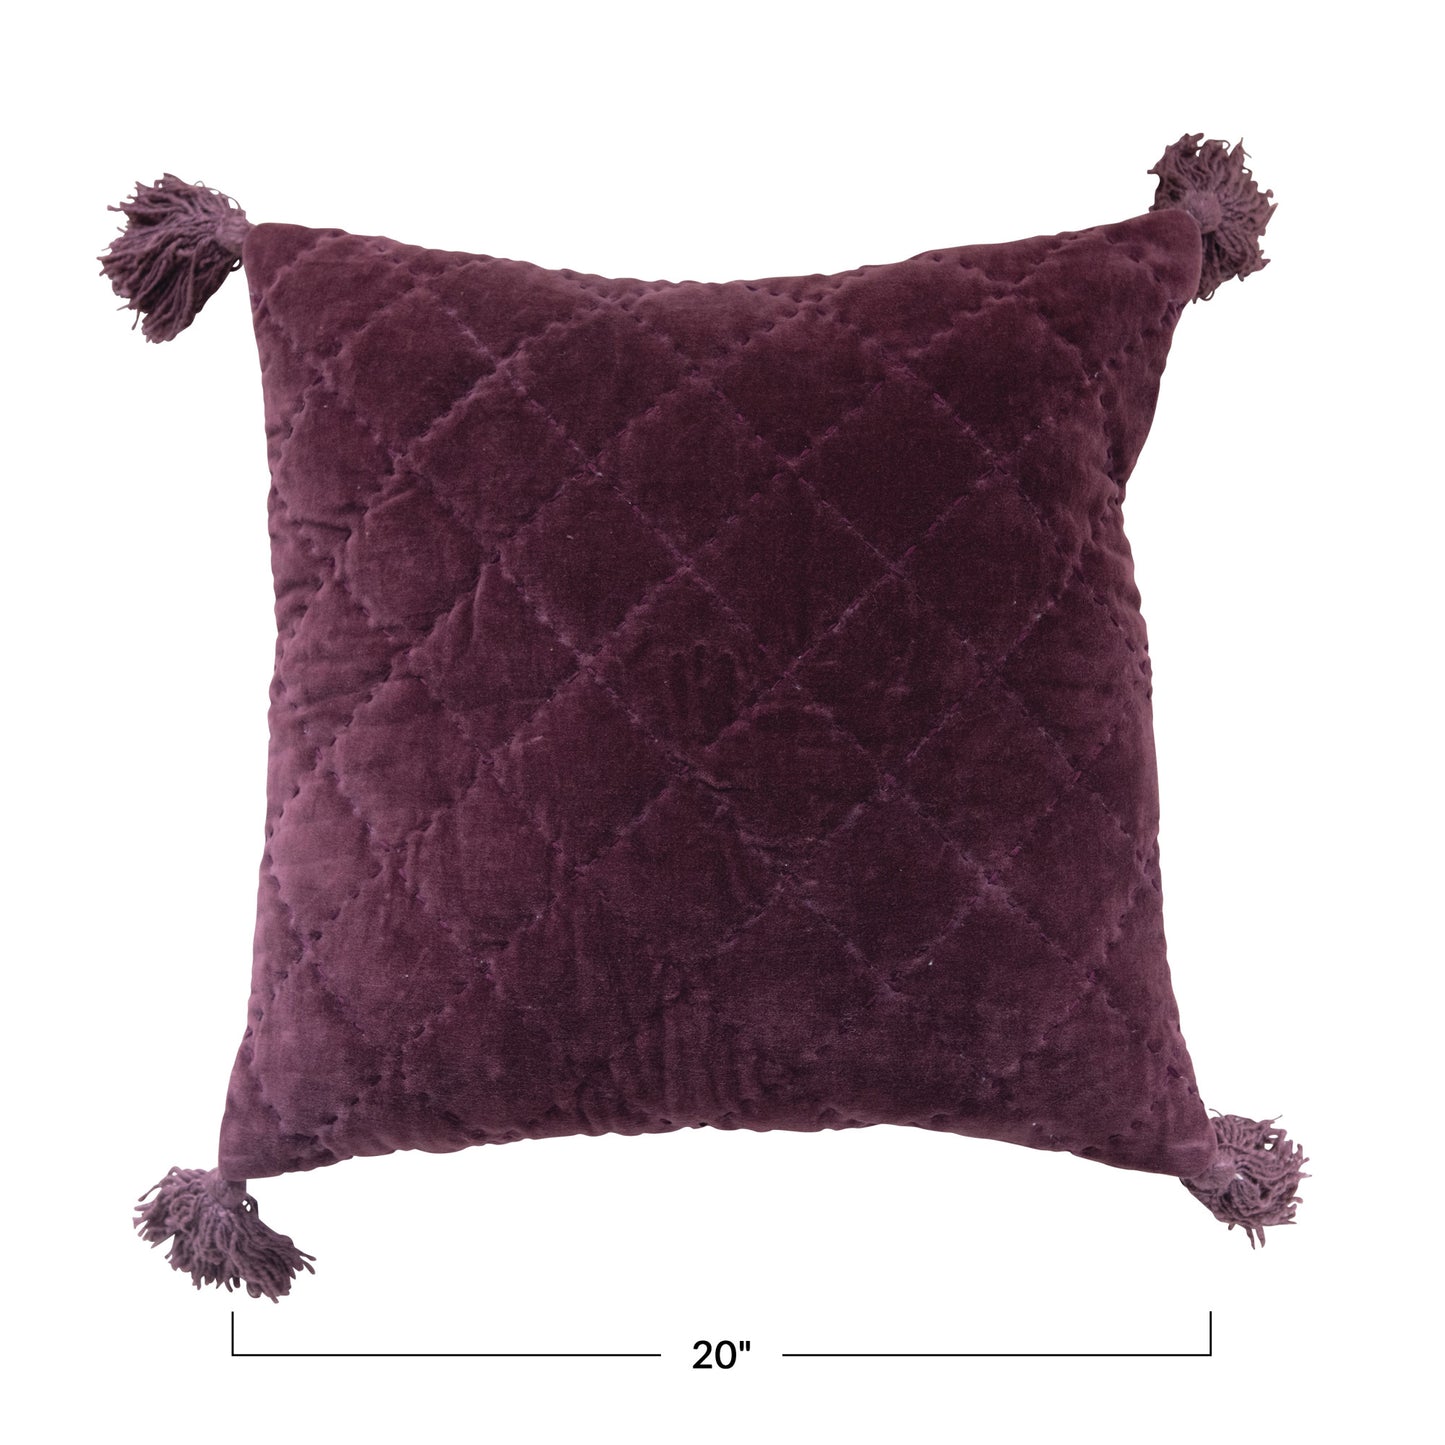 20" Quilted Cotton Velvet Pillow with Tassels, Plum